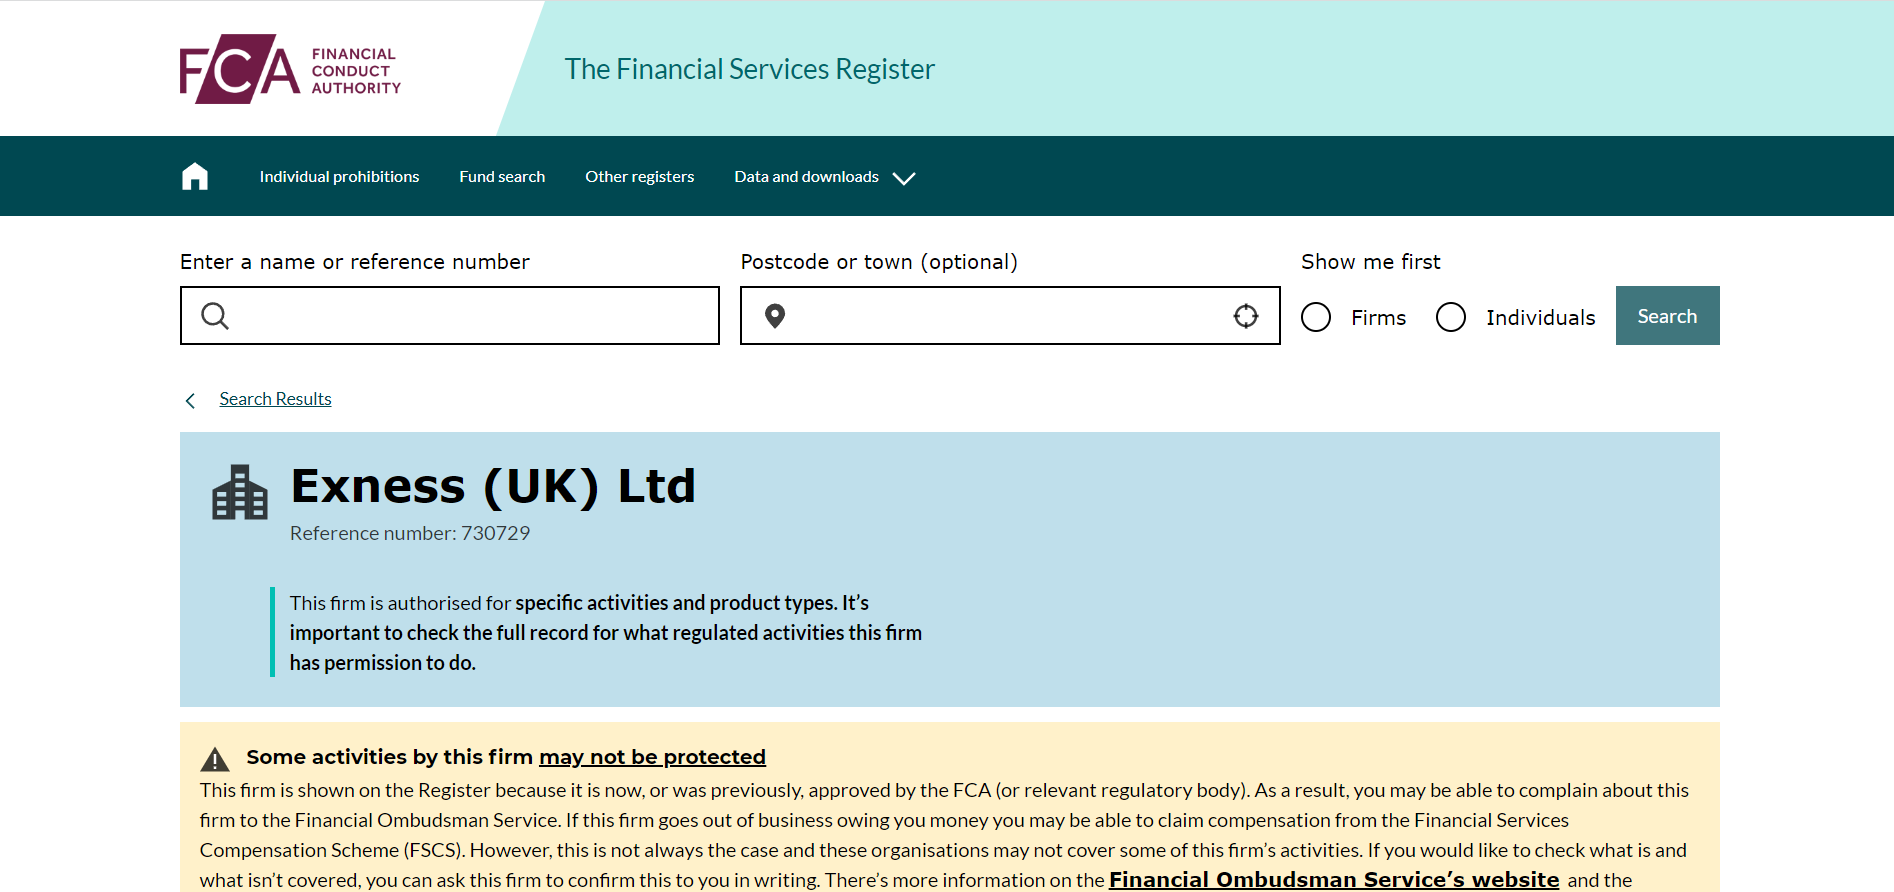 Exness on the Financial Conduct Authority (FCA) Register